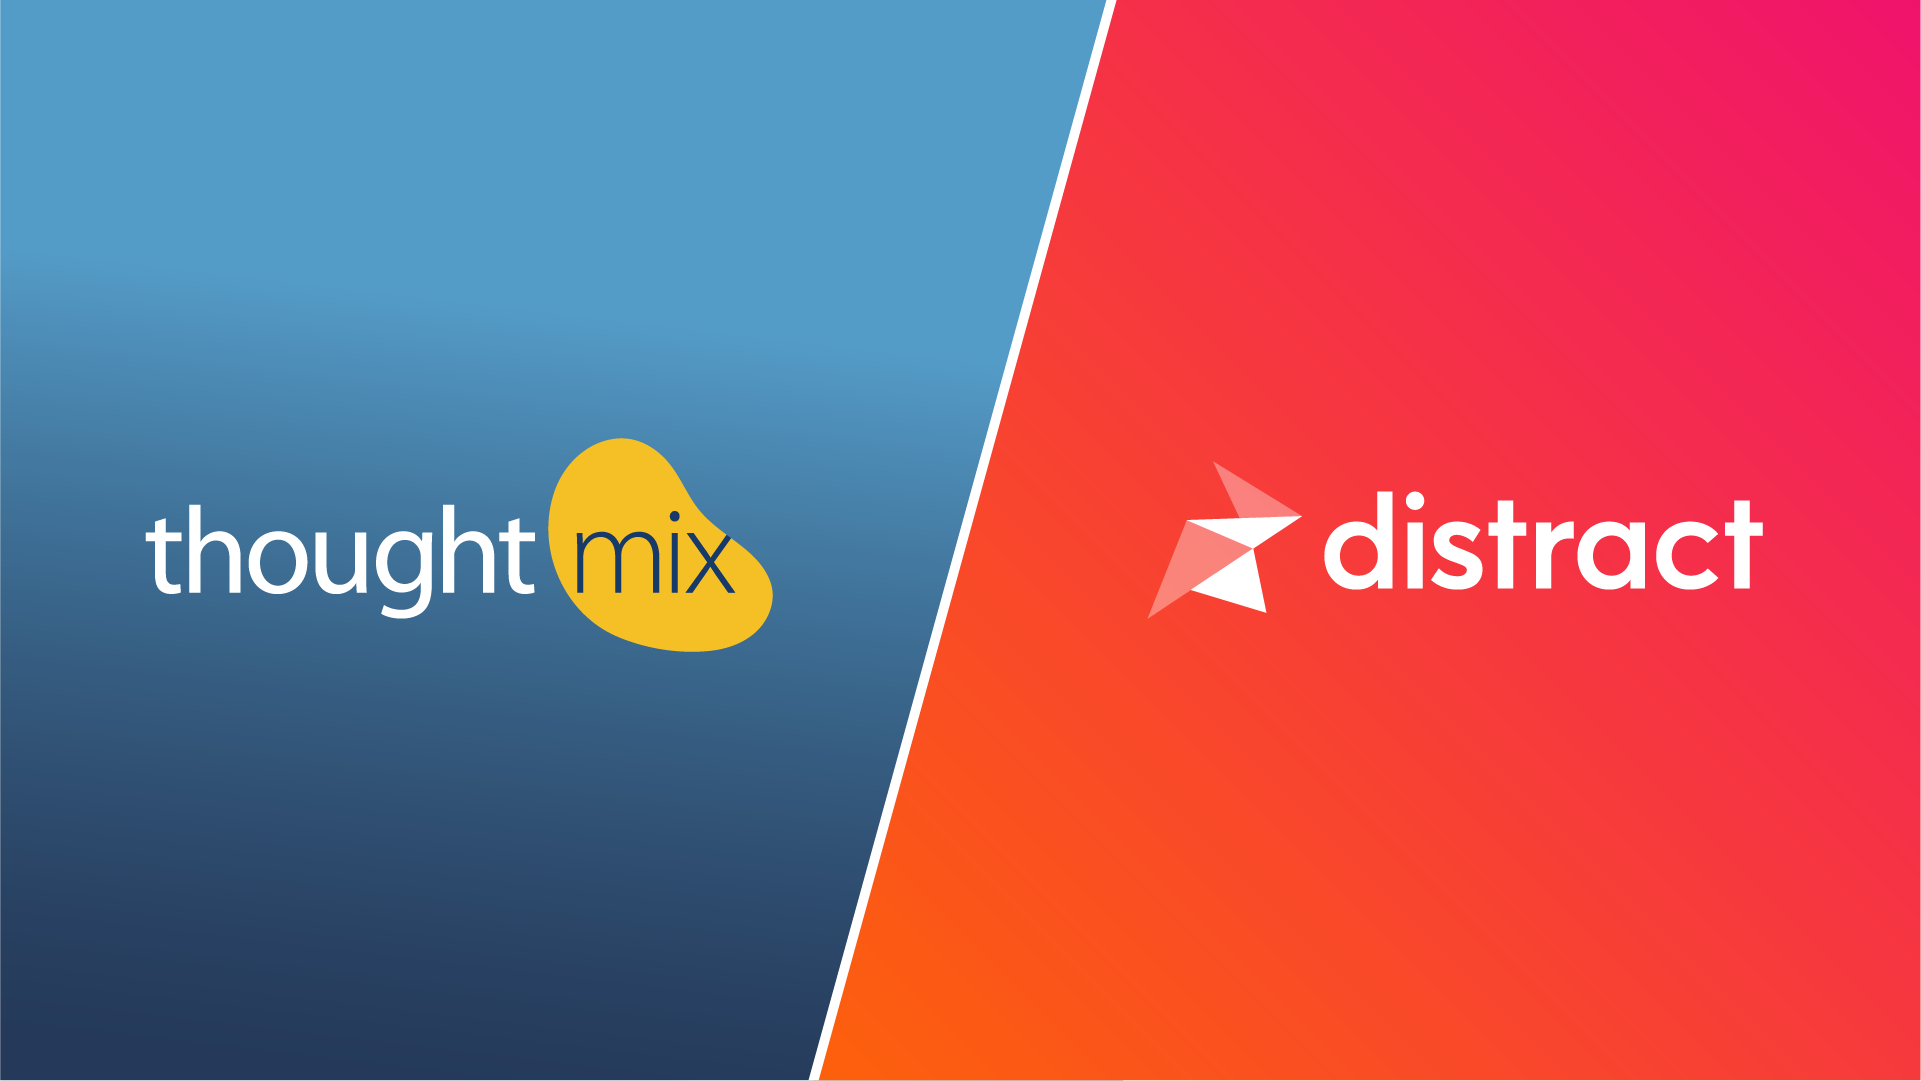 Thoughtmix founder acquires Distract